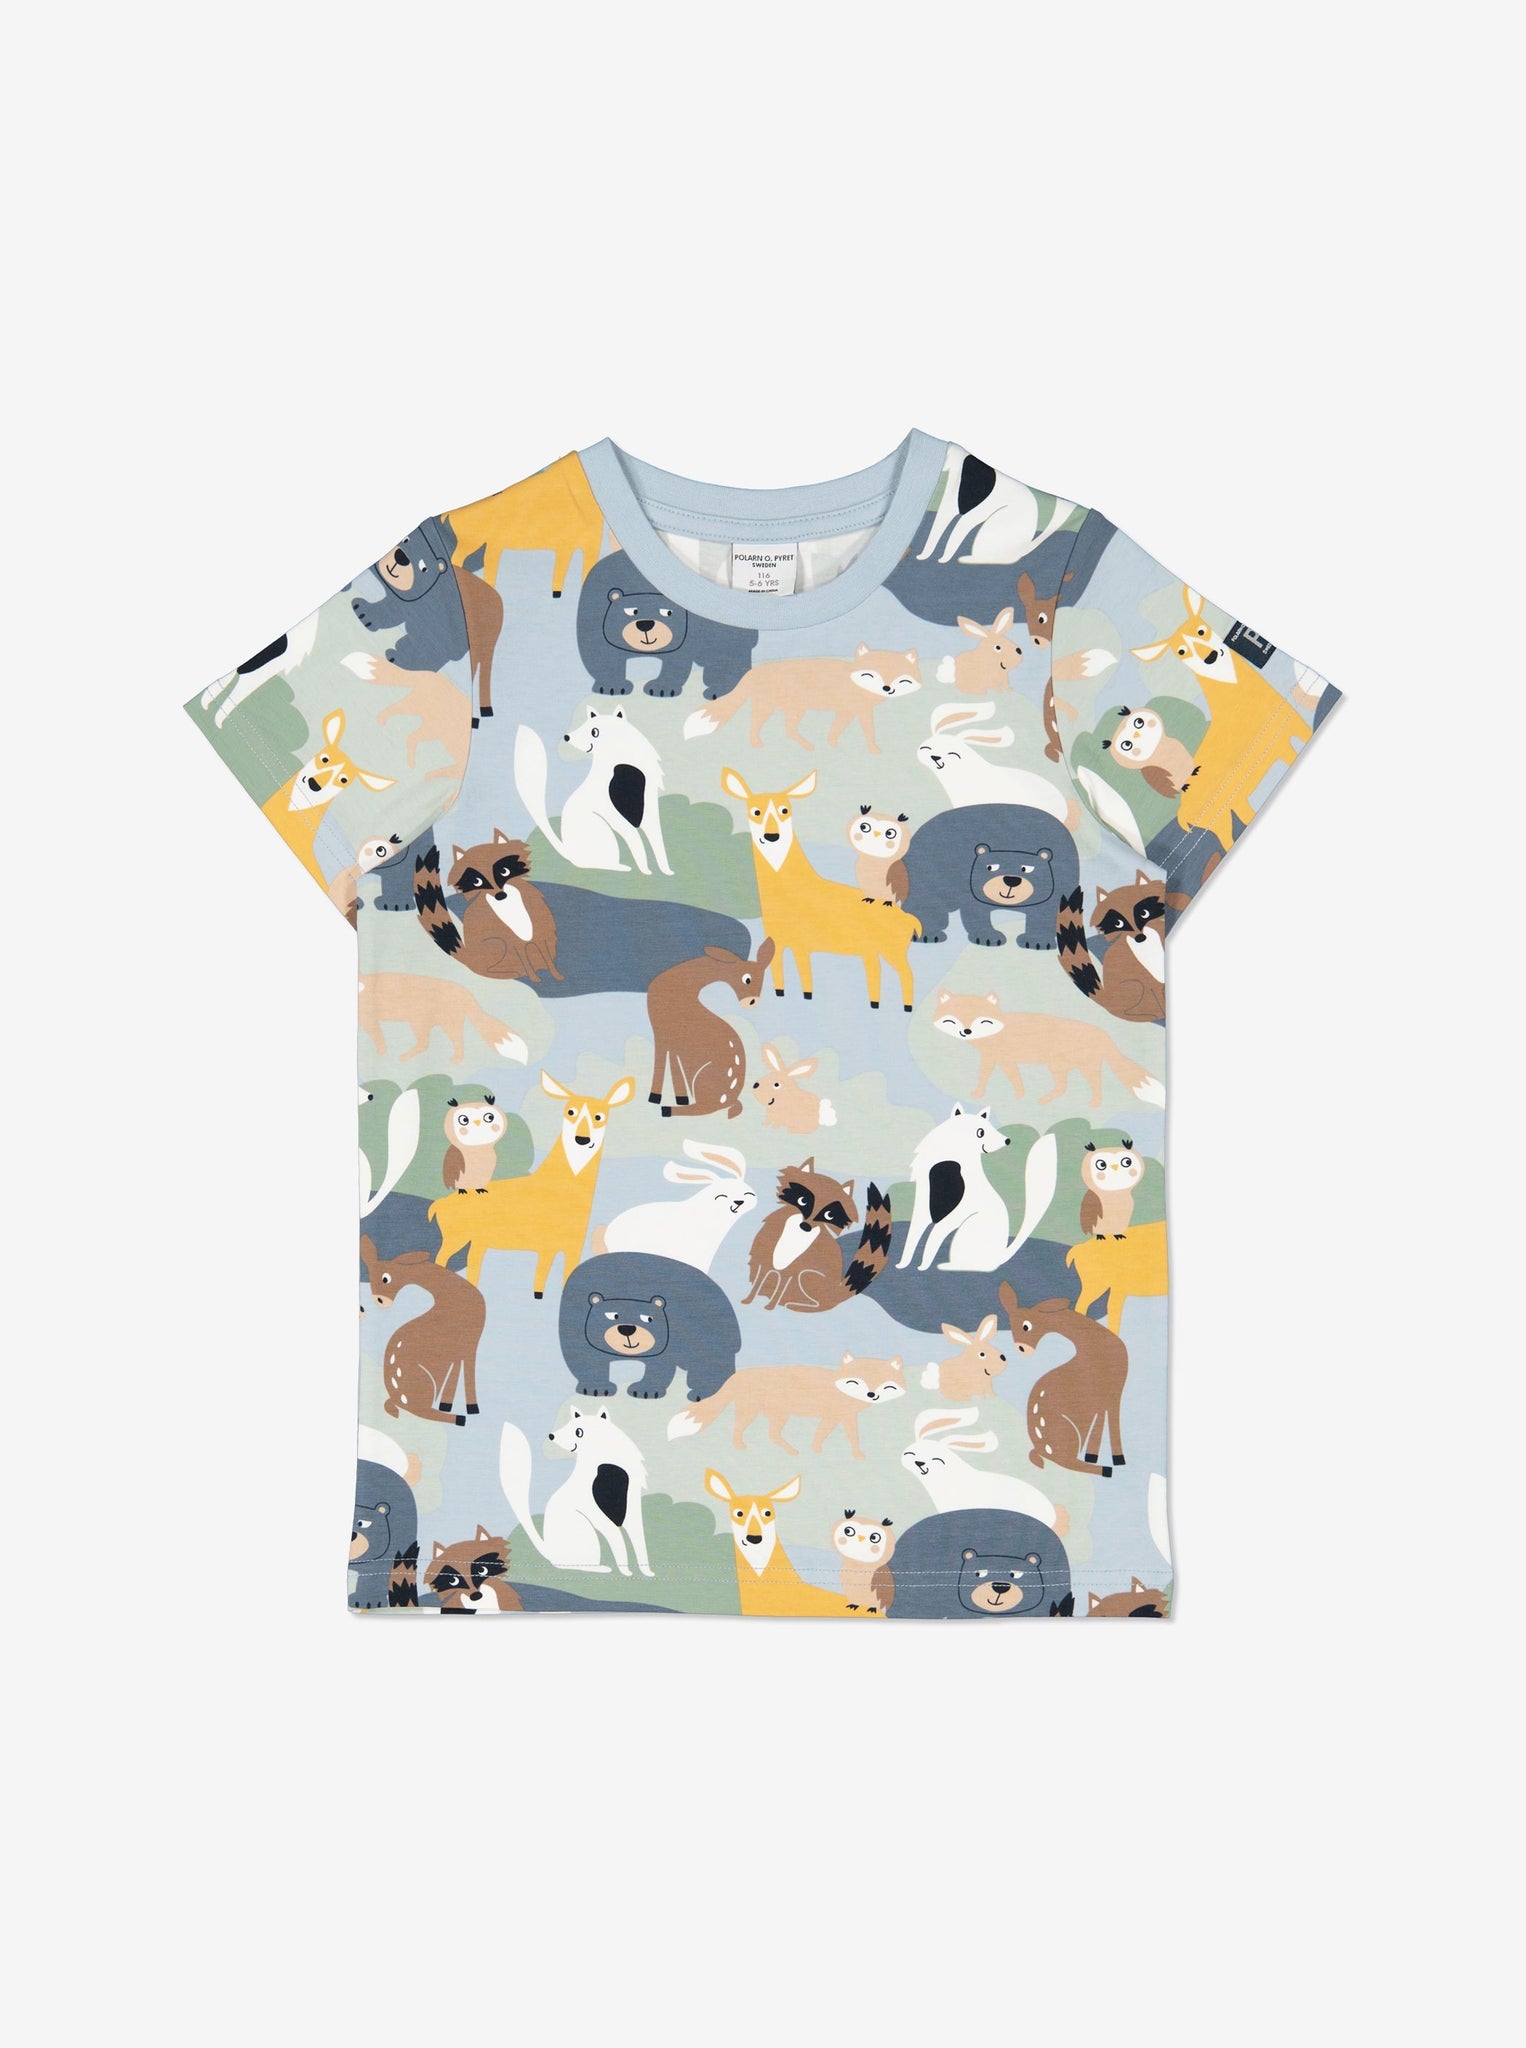  Blue Animal Print Kids T-shirt from Polarn O. Pyret Kidswear. Made using eco-friendly materials.